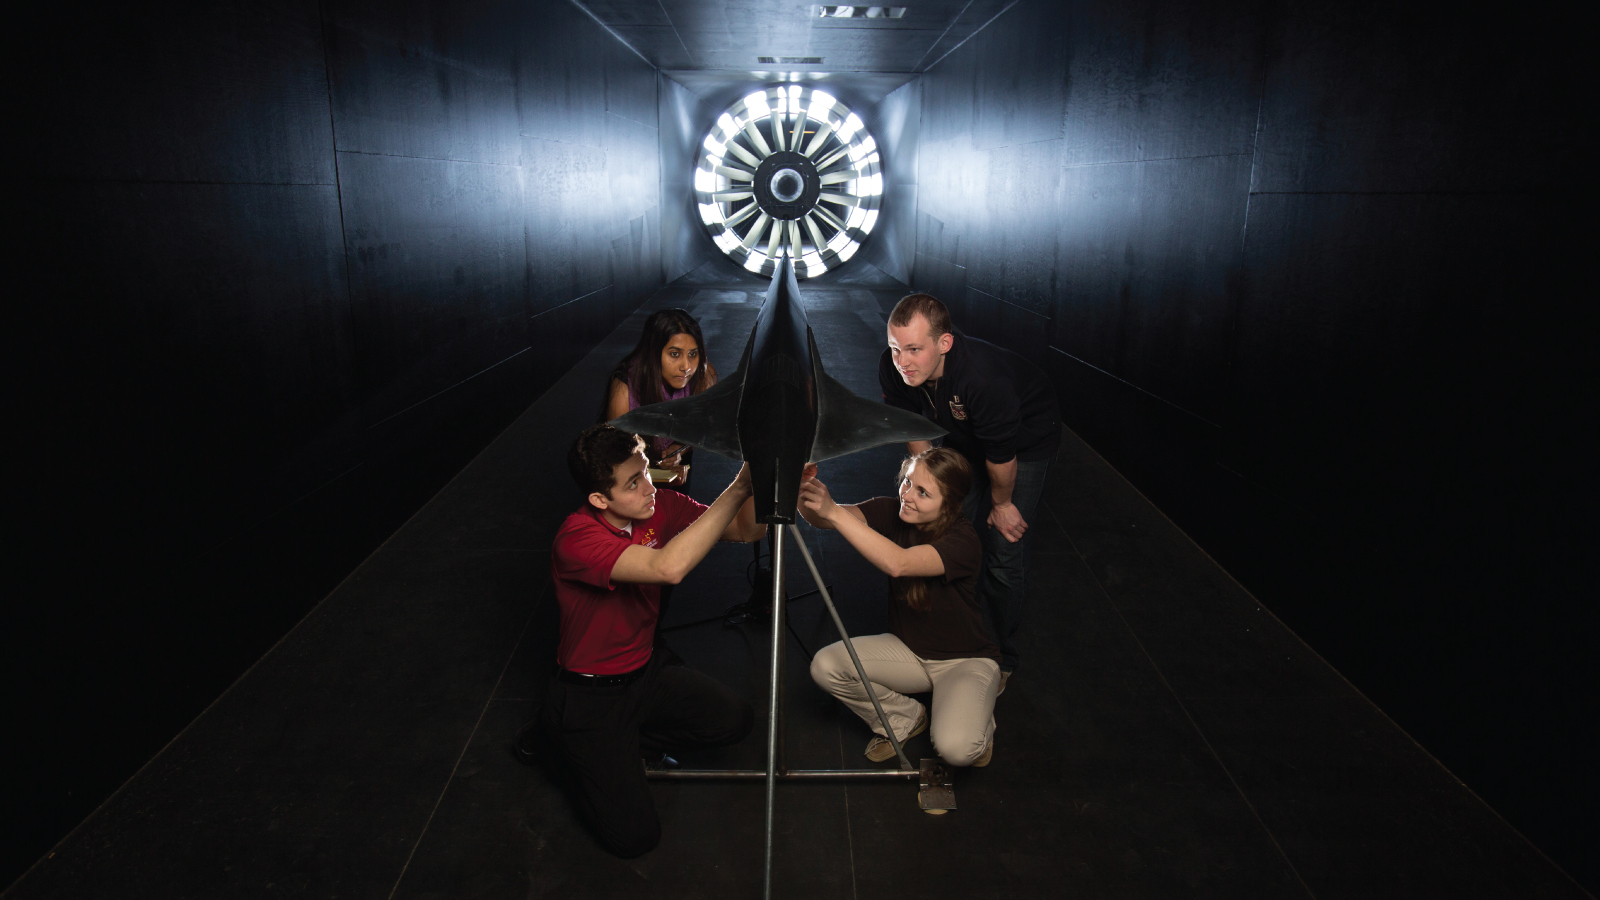 Four students fixing model plane in a wind tunnel with a glowing fan at the end